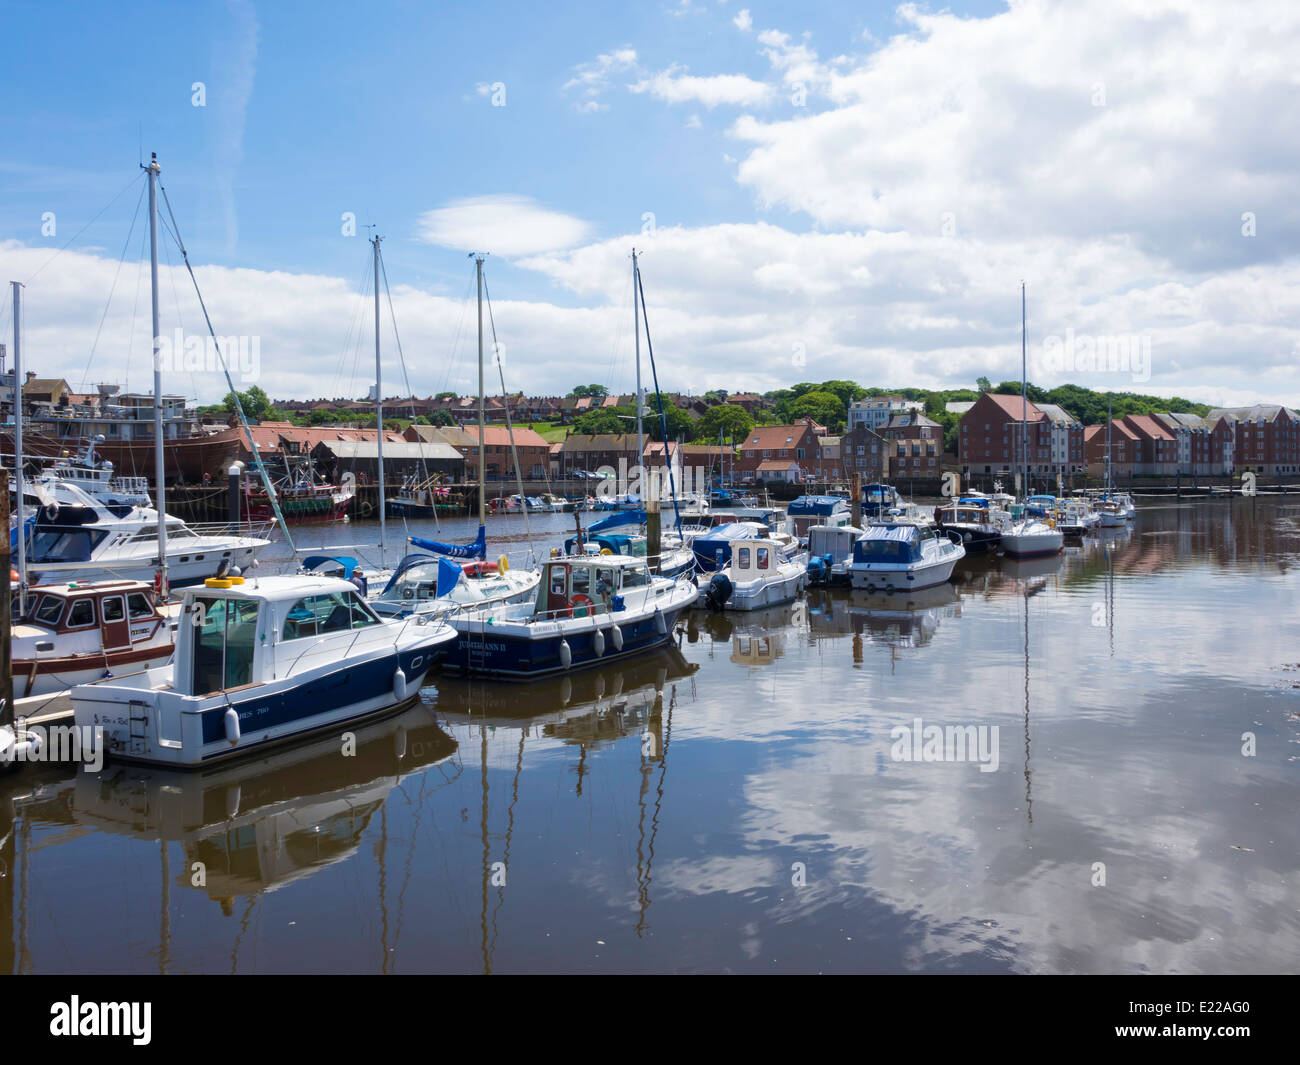 Whitby marina, in the river Esk with small pleasure craft in summer sunshine Stock Photo